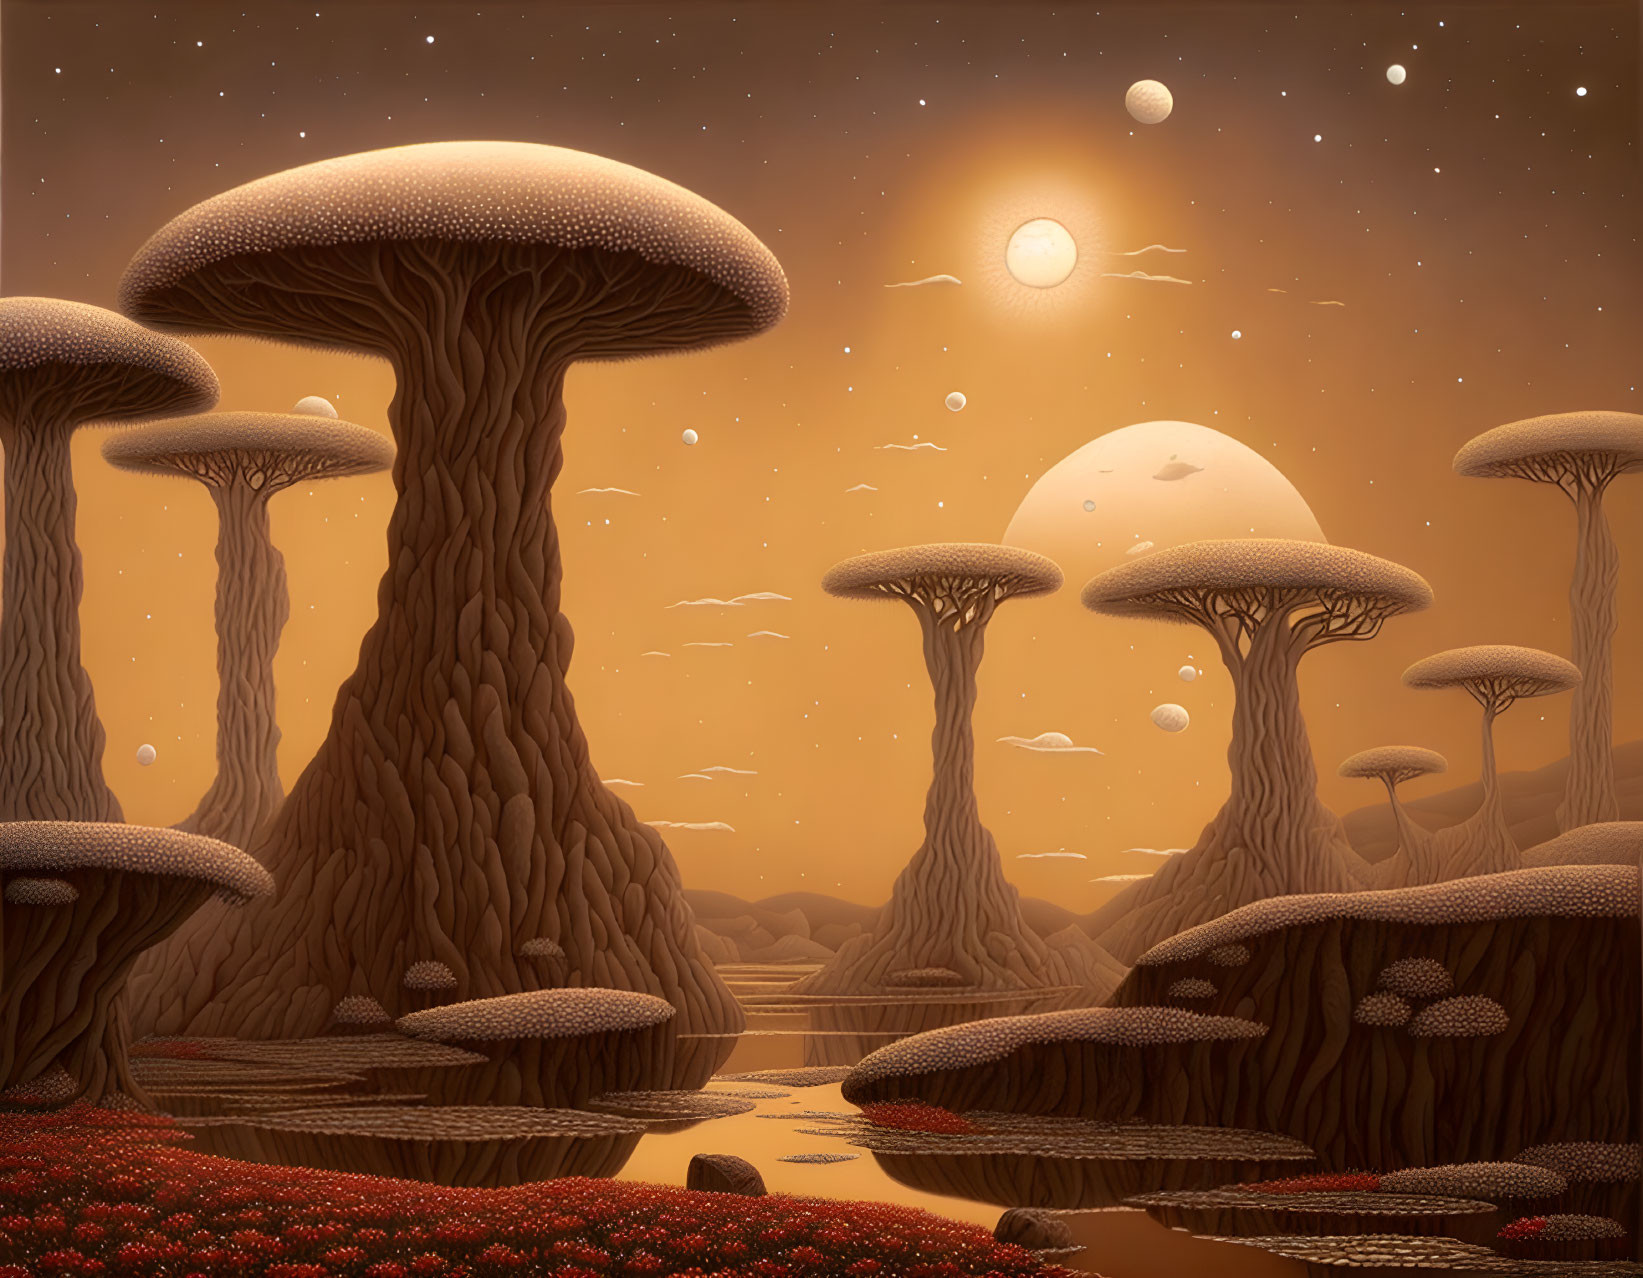 Tranquility Planet of giant terraforming mushrooms